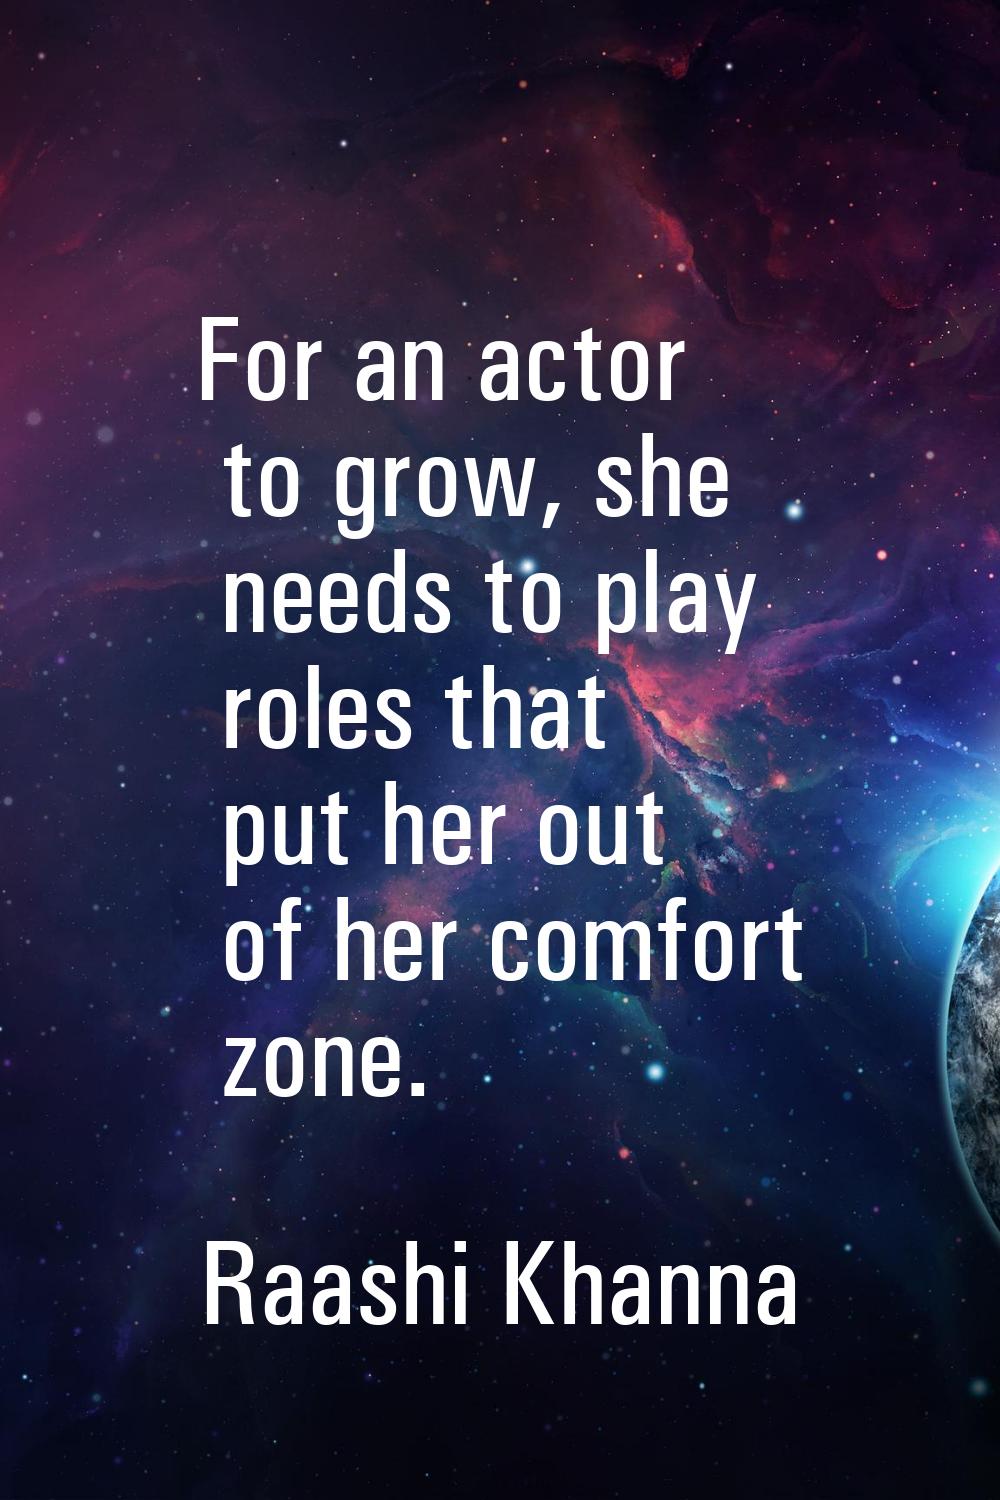 For an actor to grow, she needs to play roles that put her out of her comfort zone.